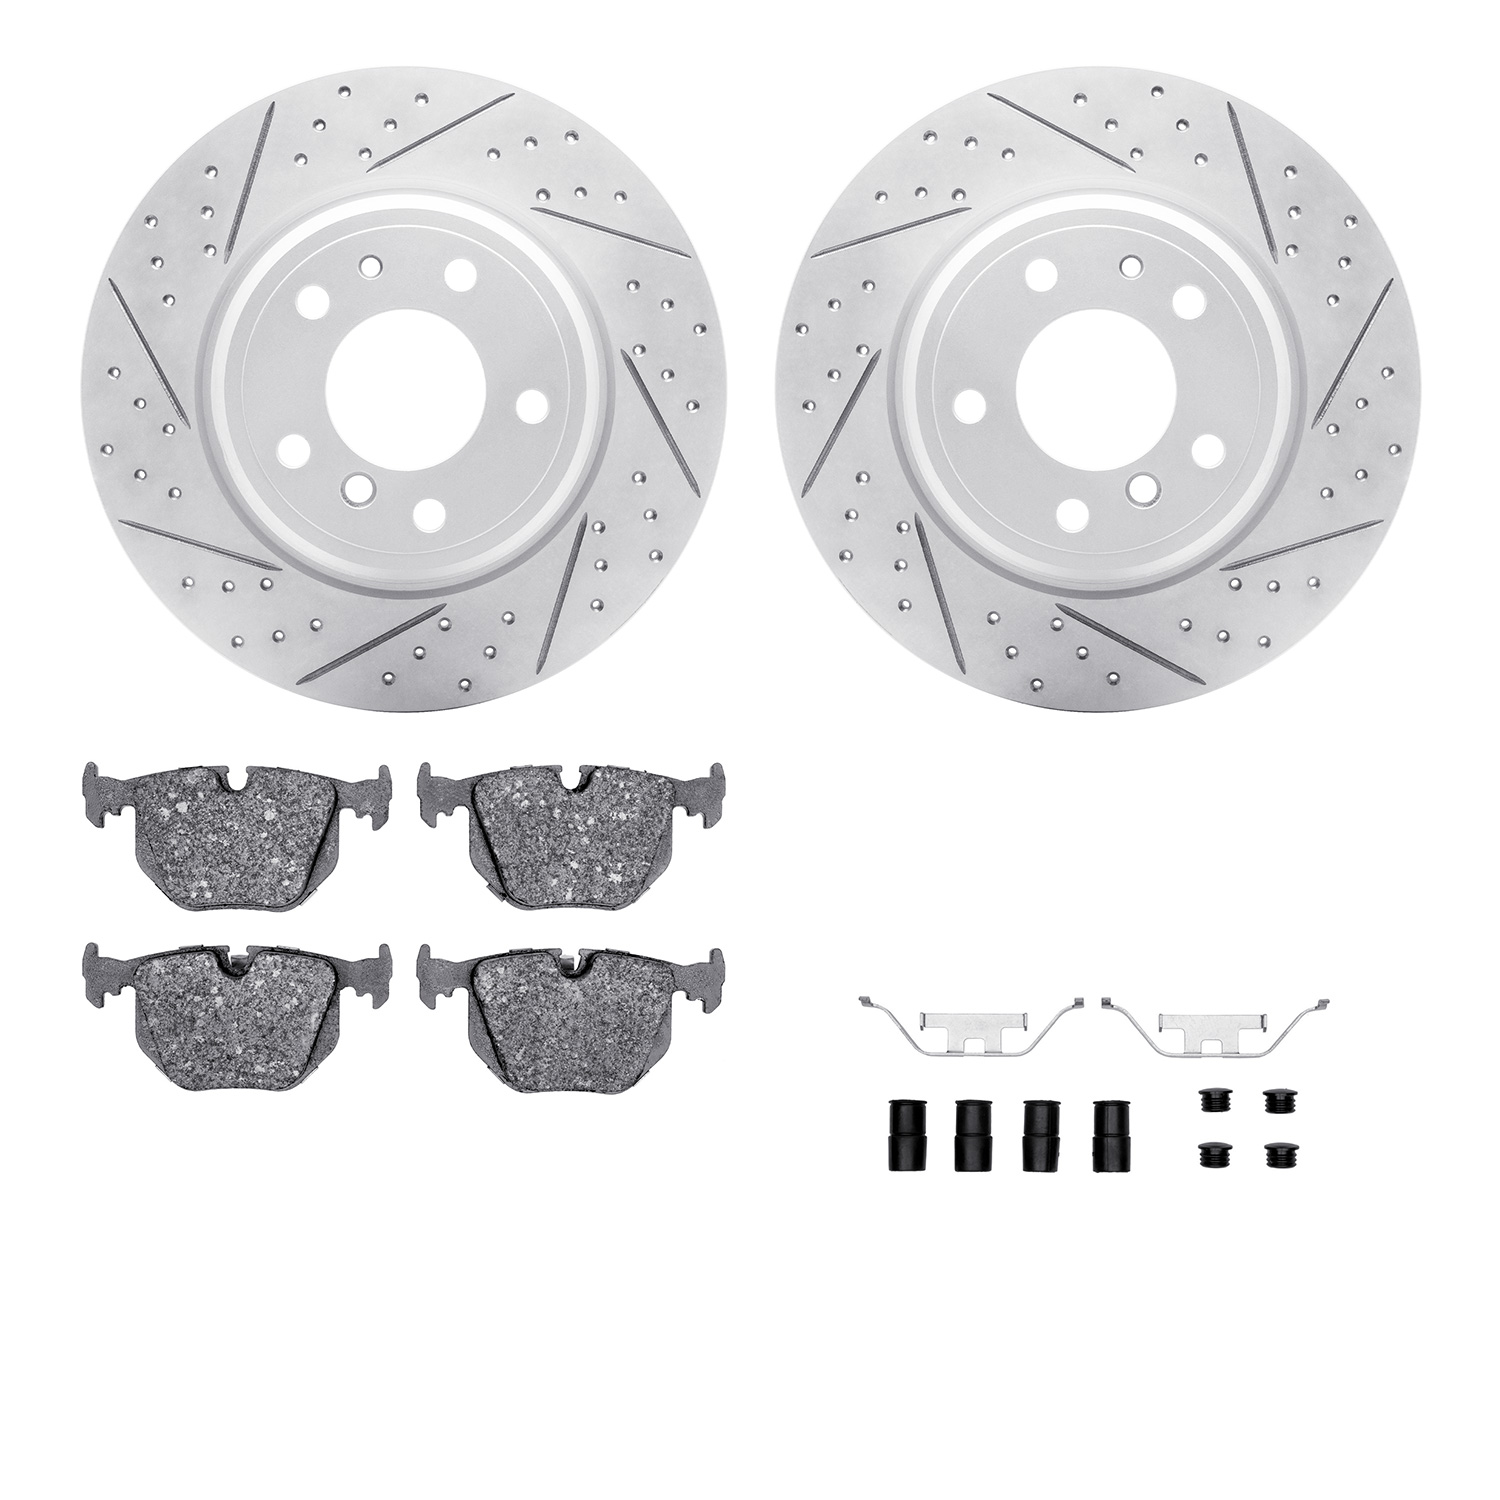 2512-31013 Geoperformance Drilled/Slotted Rotors w/5000 Advanced Brake Pads Kit & Hardware, 1991-2001 BMW, Position: Rear